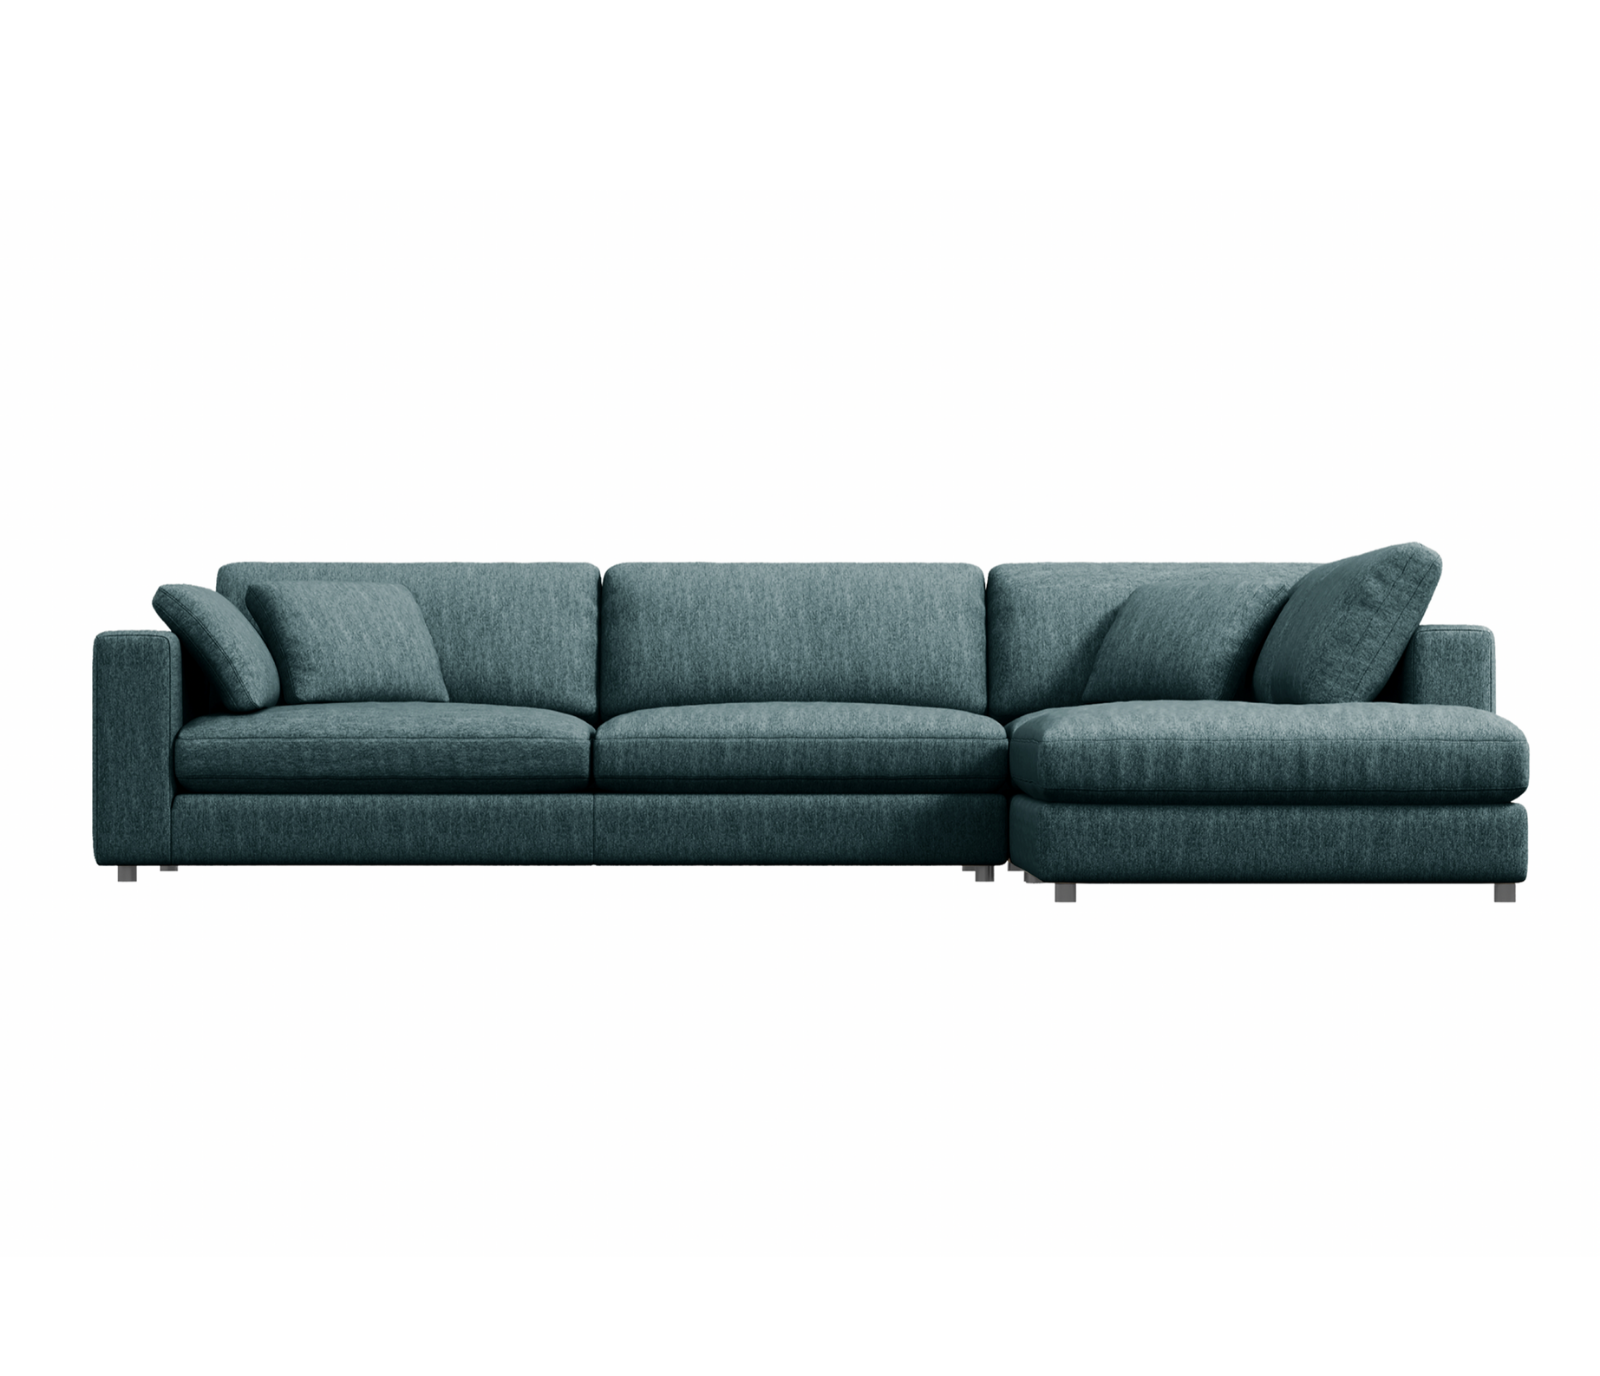 Janelle 3 Piece Sectional - Ocean Blue Fabric